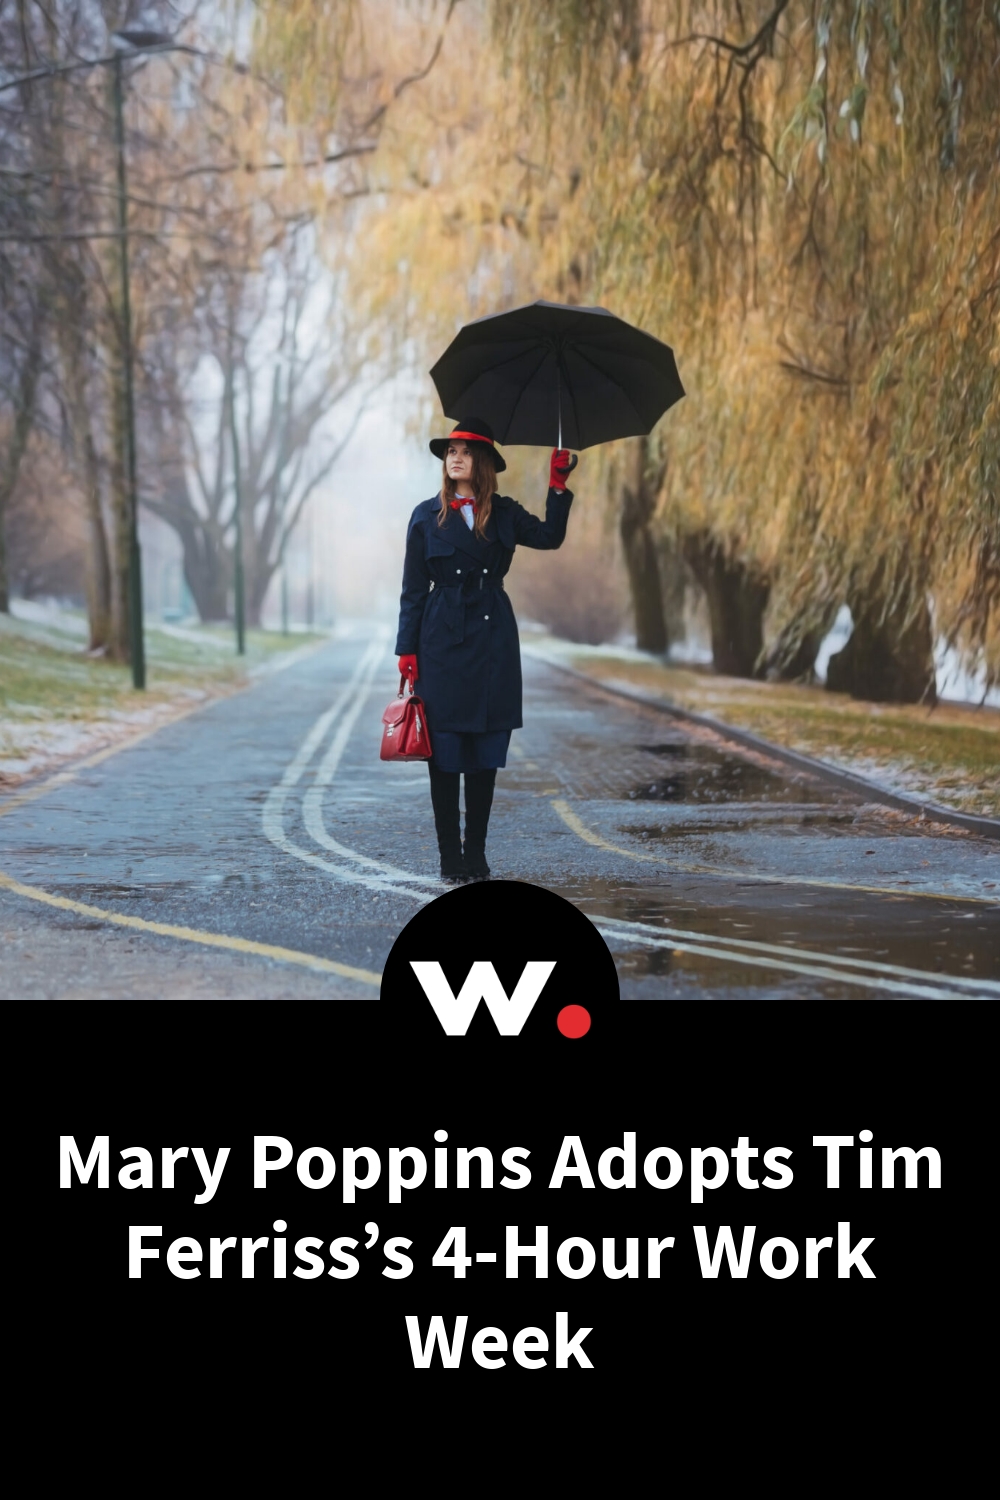 Mary Poppins Adopts Tim Ferriss’s 4-Hour Work Week